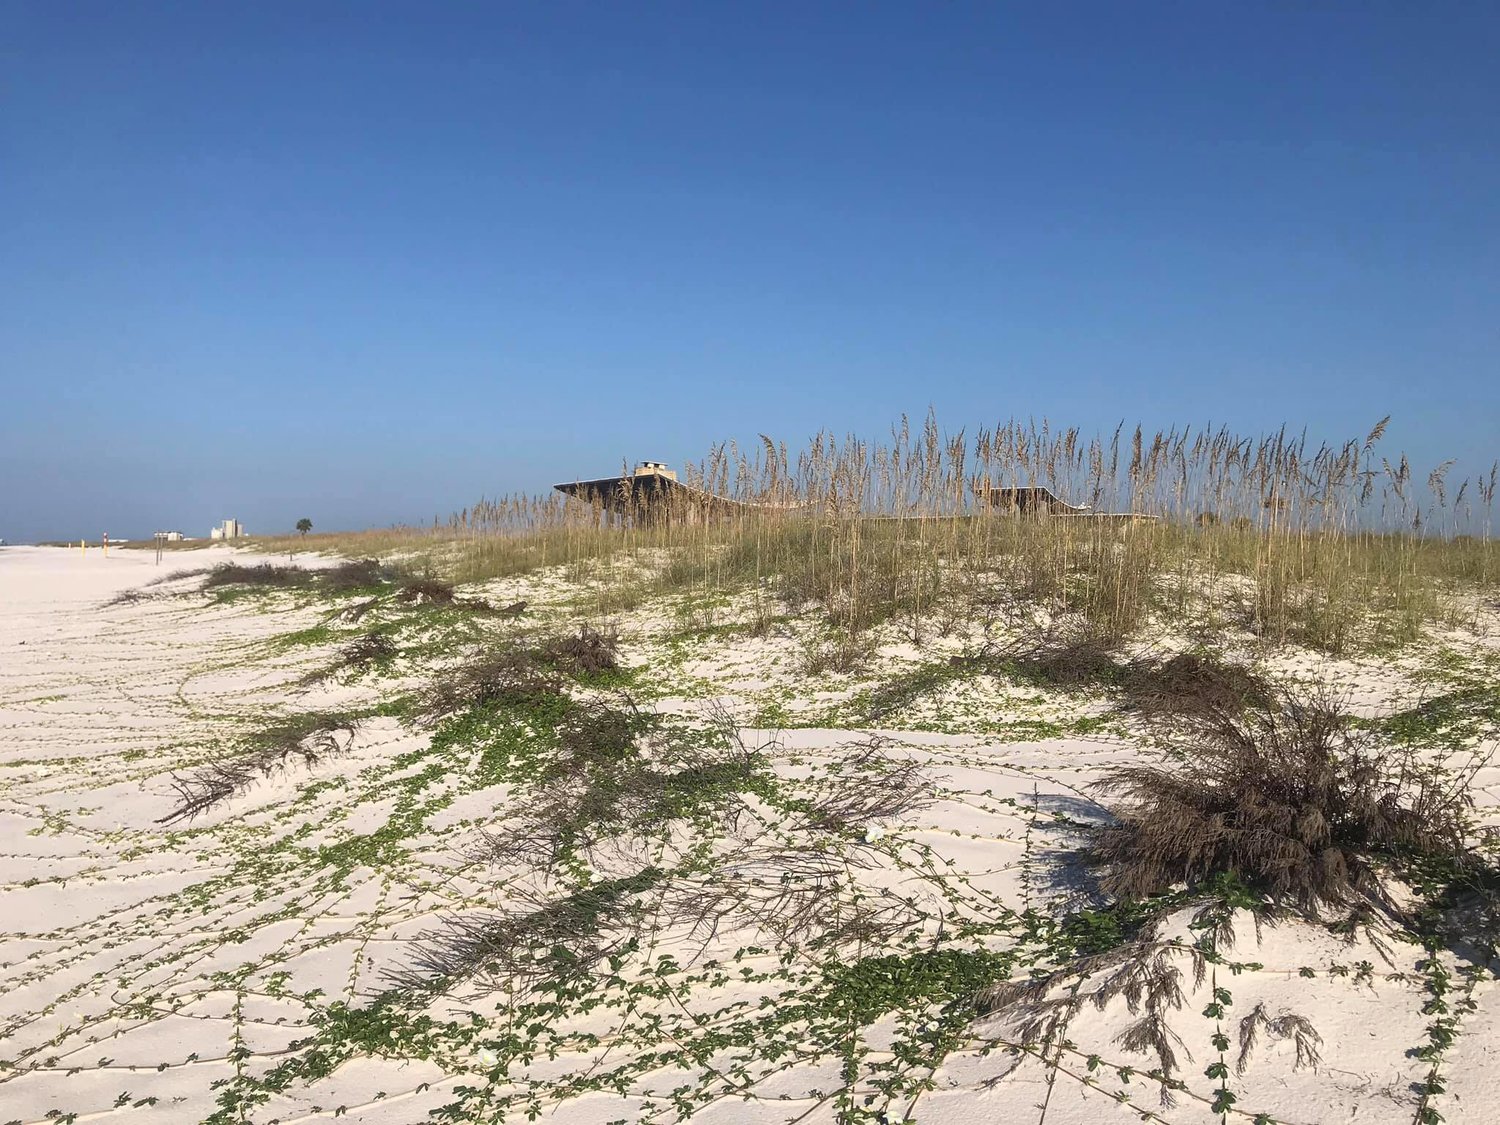 In 2019, six months after being placed, the trees built up enough sand to support Railroad vine, a native dune plant.